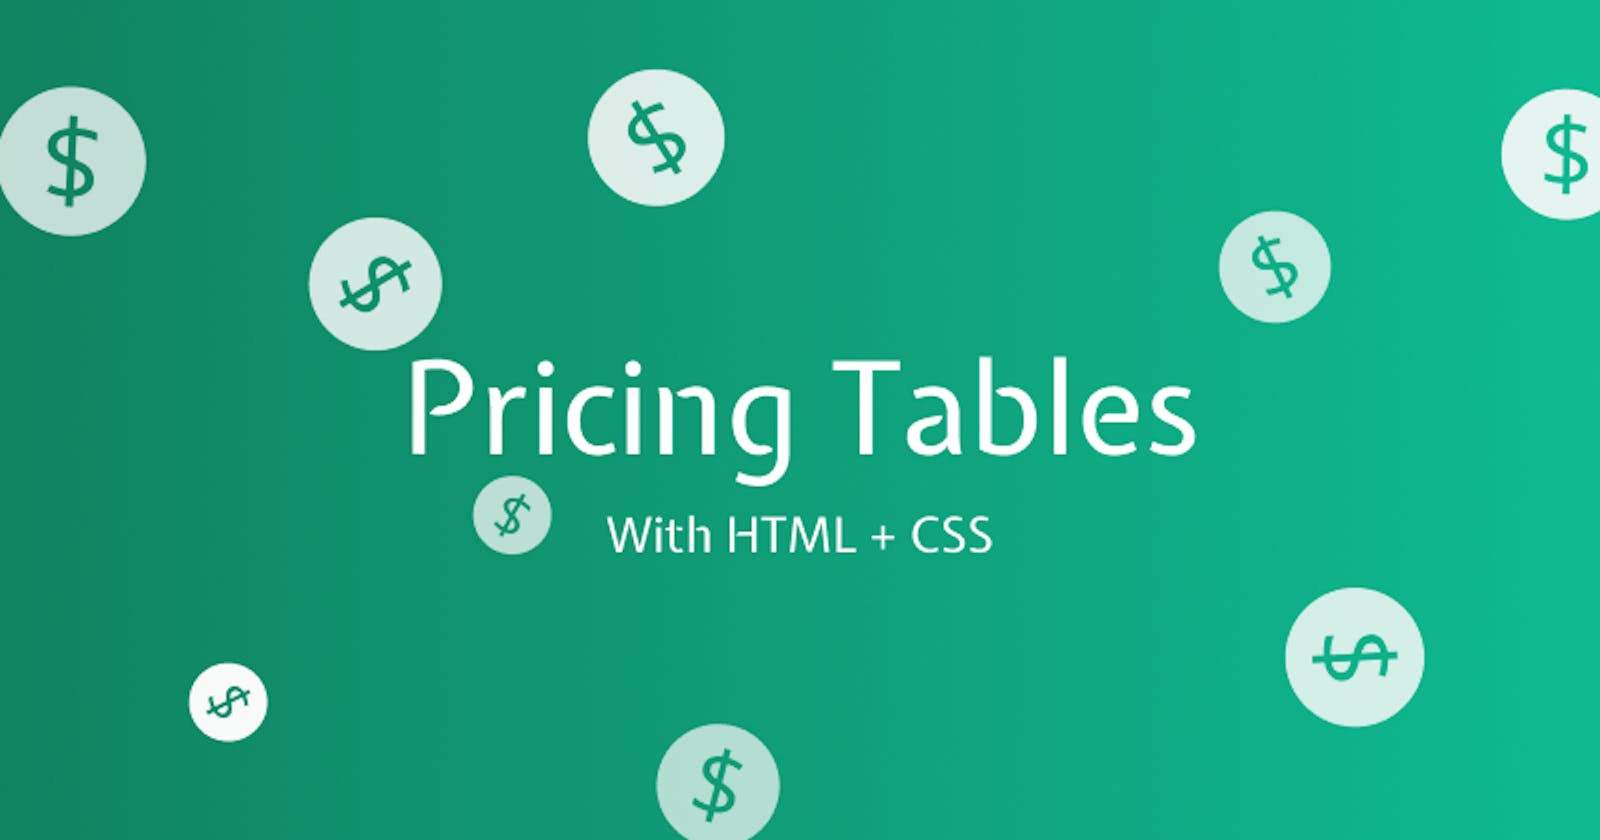 Building Pricing Tables with HTML + CSS